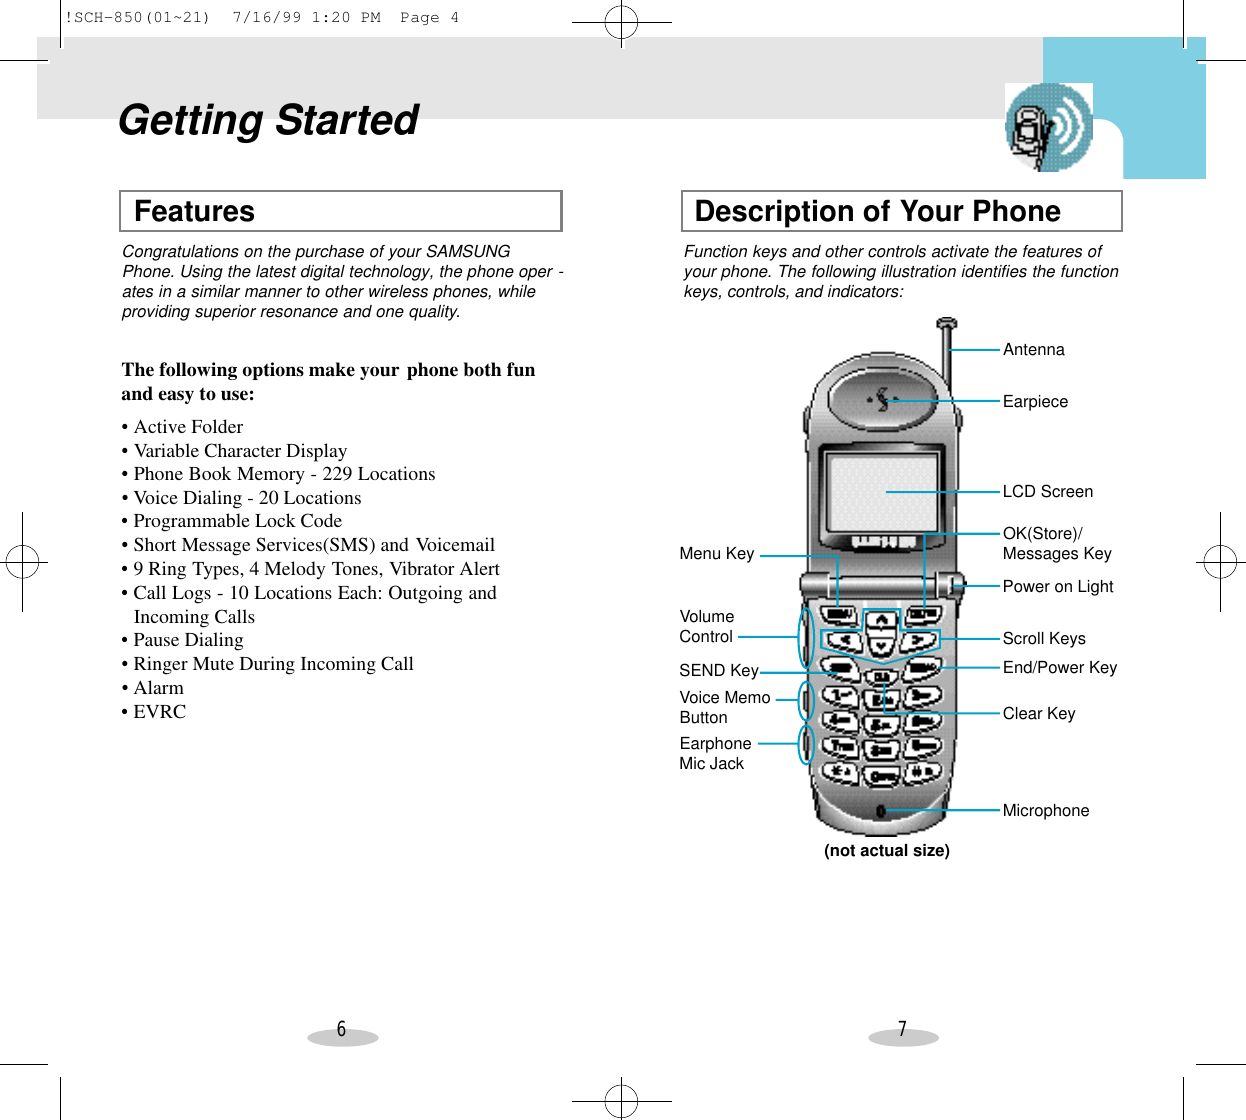 6 7Features Description of Your PhoneGetting StartedCongratulations on the purchase of your SAMSUNGPhone. Using the latest digital technology, the phone oper -ates in a similar manner to other wireless phones, whileproviding superior resonance and one quality.Function keys and other controls activate the features ofyour phone. The following illustration identifies the functionkeys, controls, and indicators:The following options make your phone both funand easy to use:•Active Folder•Variable Character Display•Phone Book Memory - 229 Locations•Voice Dialing - 20 Locations•Programmable Lock Code•Short Message Services(SMS) and Voicemail•9 Ring Types, 4 Melody Tones, Vibrator Alert•Call Logs - 10 Locations Each: Outgoing and Incoming Calls•Pause Dialing•Ringer Mute During Incoming Call•Alarm•EVRCMenu KeyAntennaVolumeControl(not actual size)Voice MemoButtonSEND KeyEarpieceLCD ScreenOK(Store)/Messages KeyScroll KeysMicrophoneEnd/Power KeyPower on LightClear KeyEarphoneMic Jack!SCH-850(01~21)  7/16/99 1:20 PM  Page 4